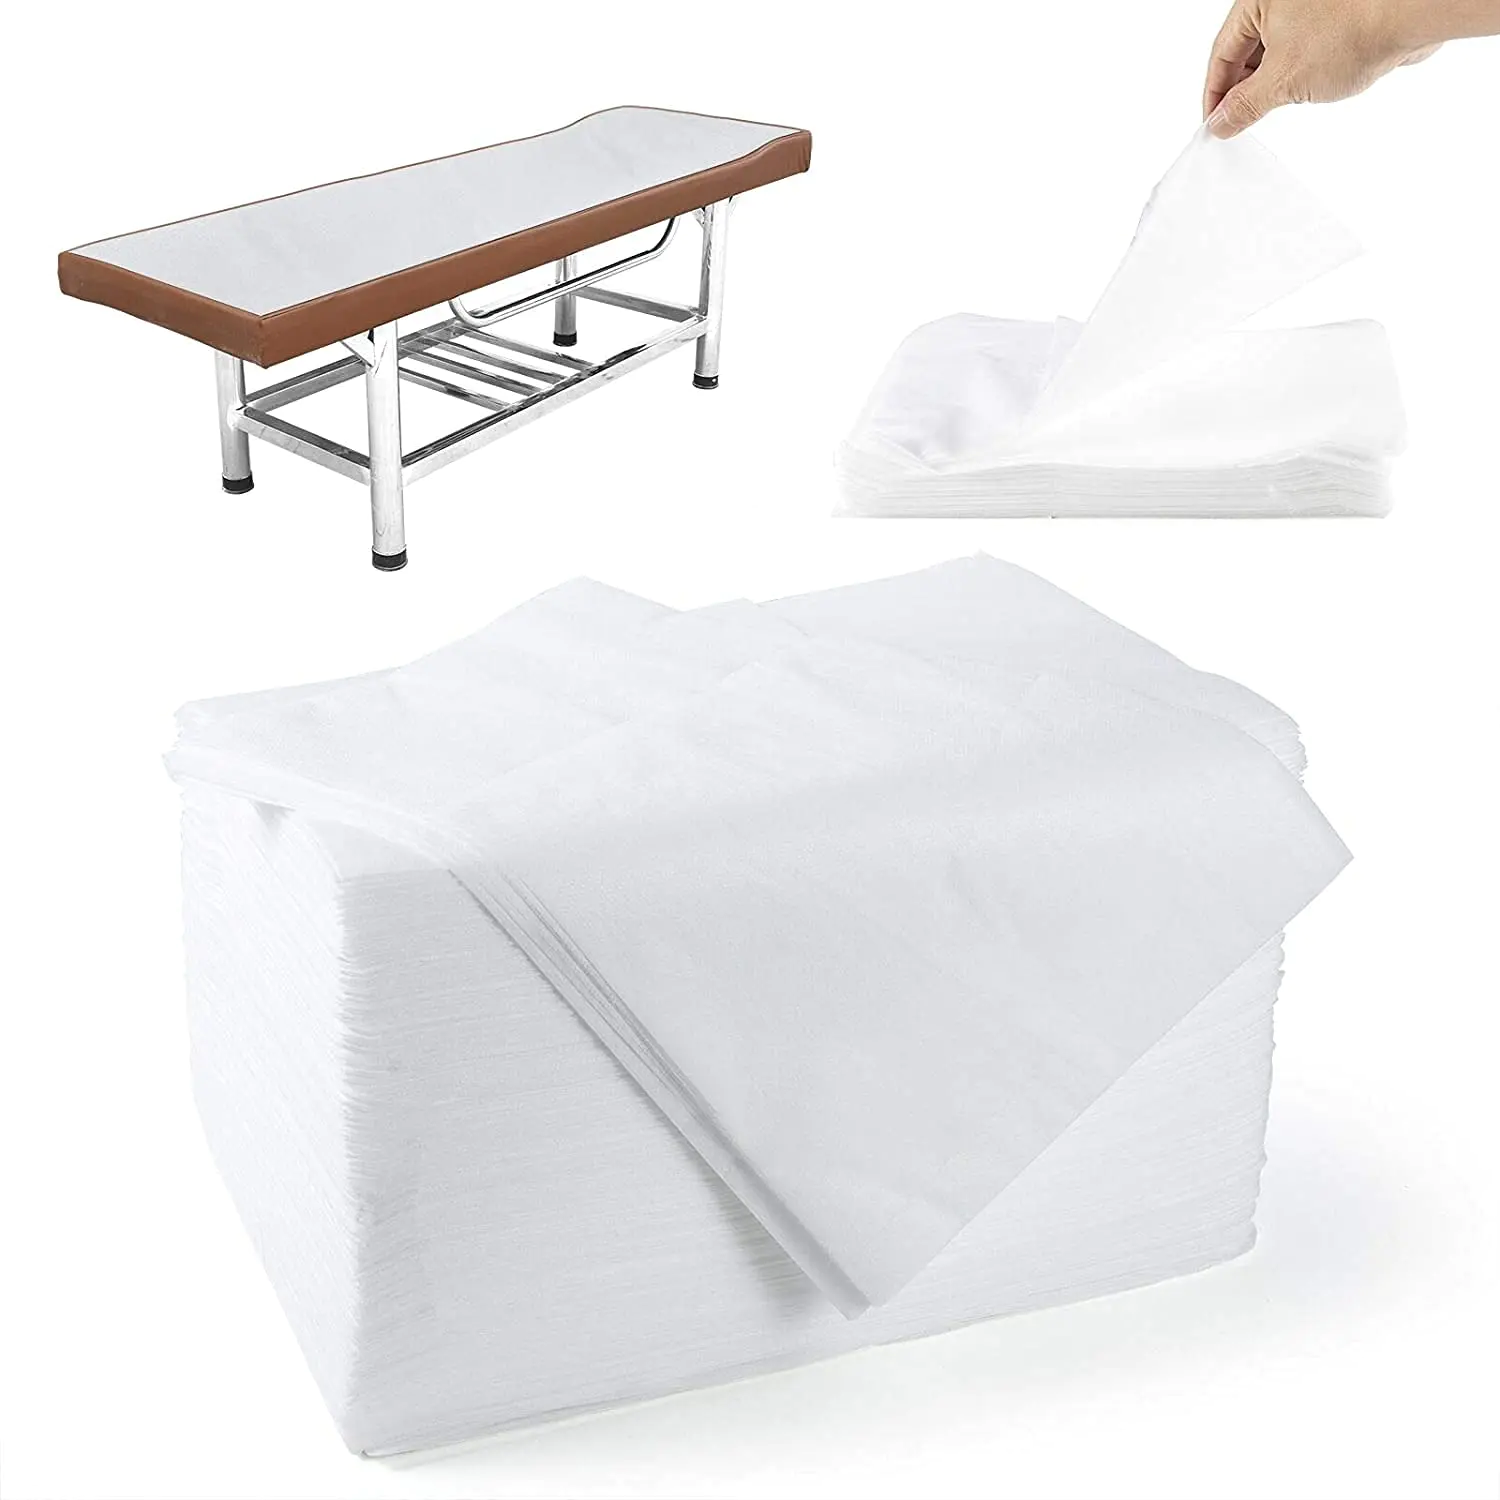 Breathable waterproof furniture nonwoven fabric mattress spunbond non woven fabric for bed cover using